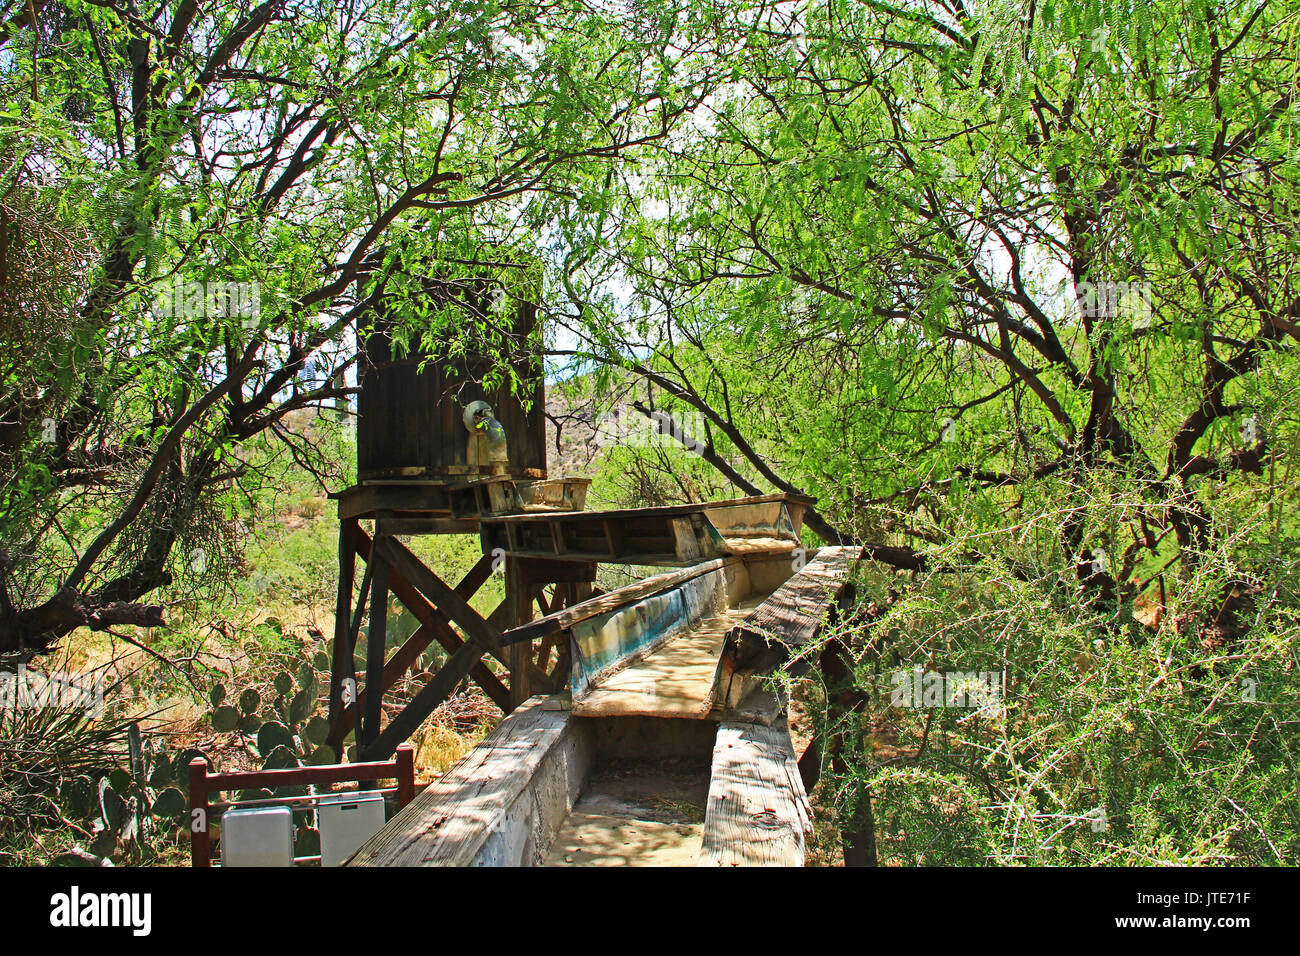 Hidden old mining sluice box with water barrel in the butterfly garden on La Posta Quemada Ranch in Colossal Cave Mountain Park in Vail, Arizona, USA Stock Photo